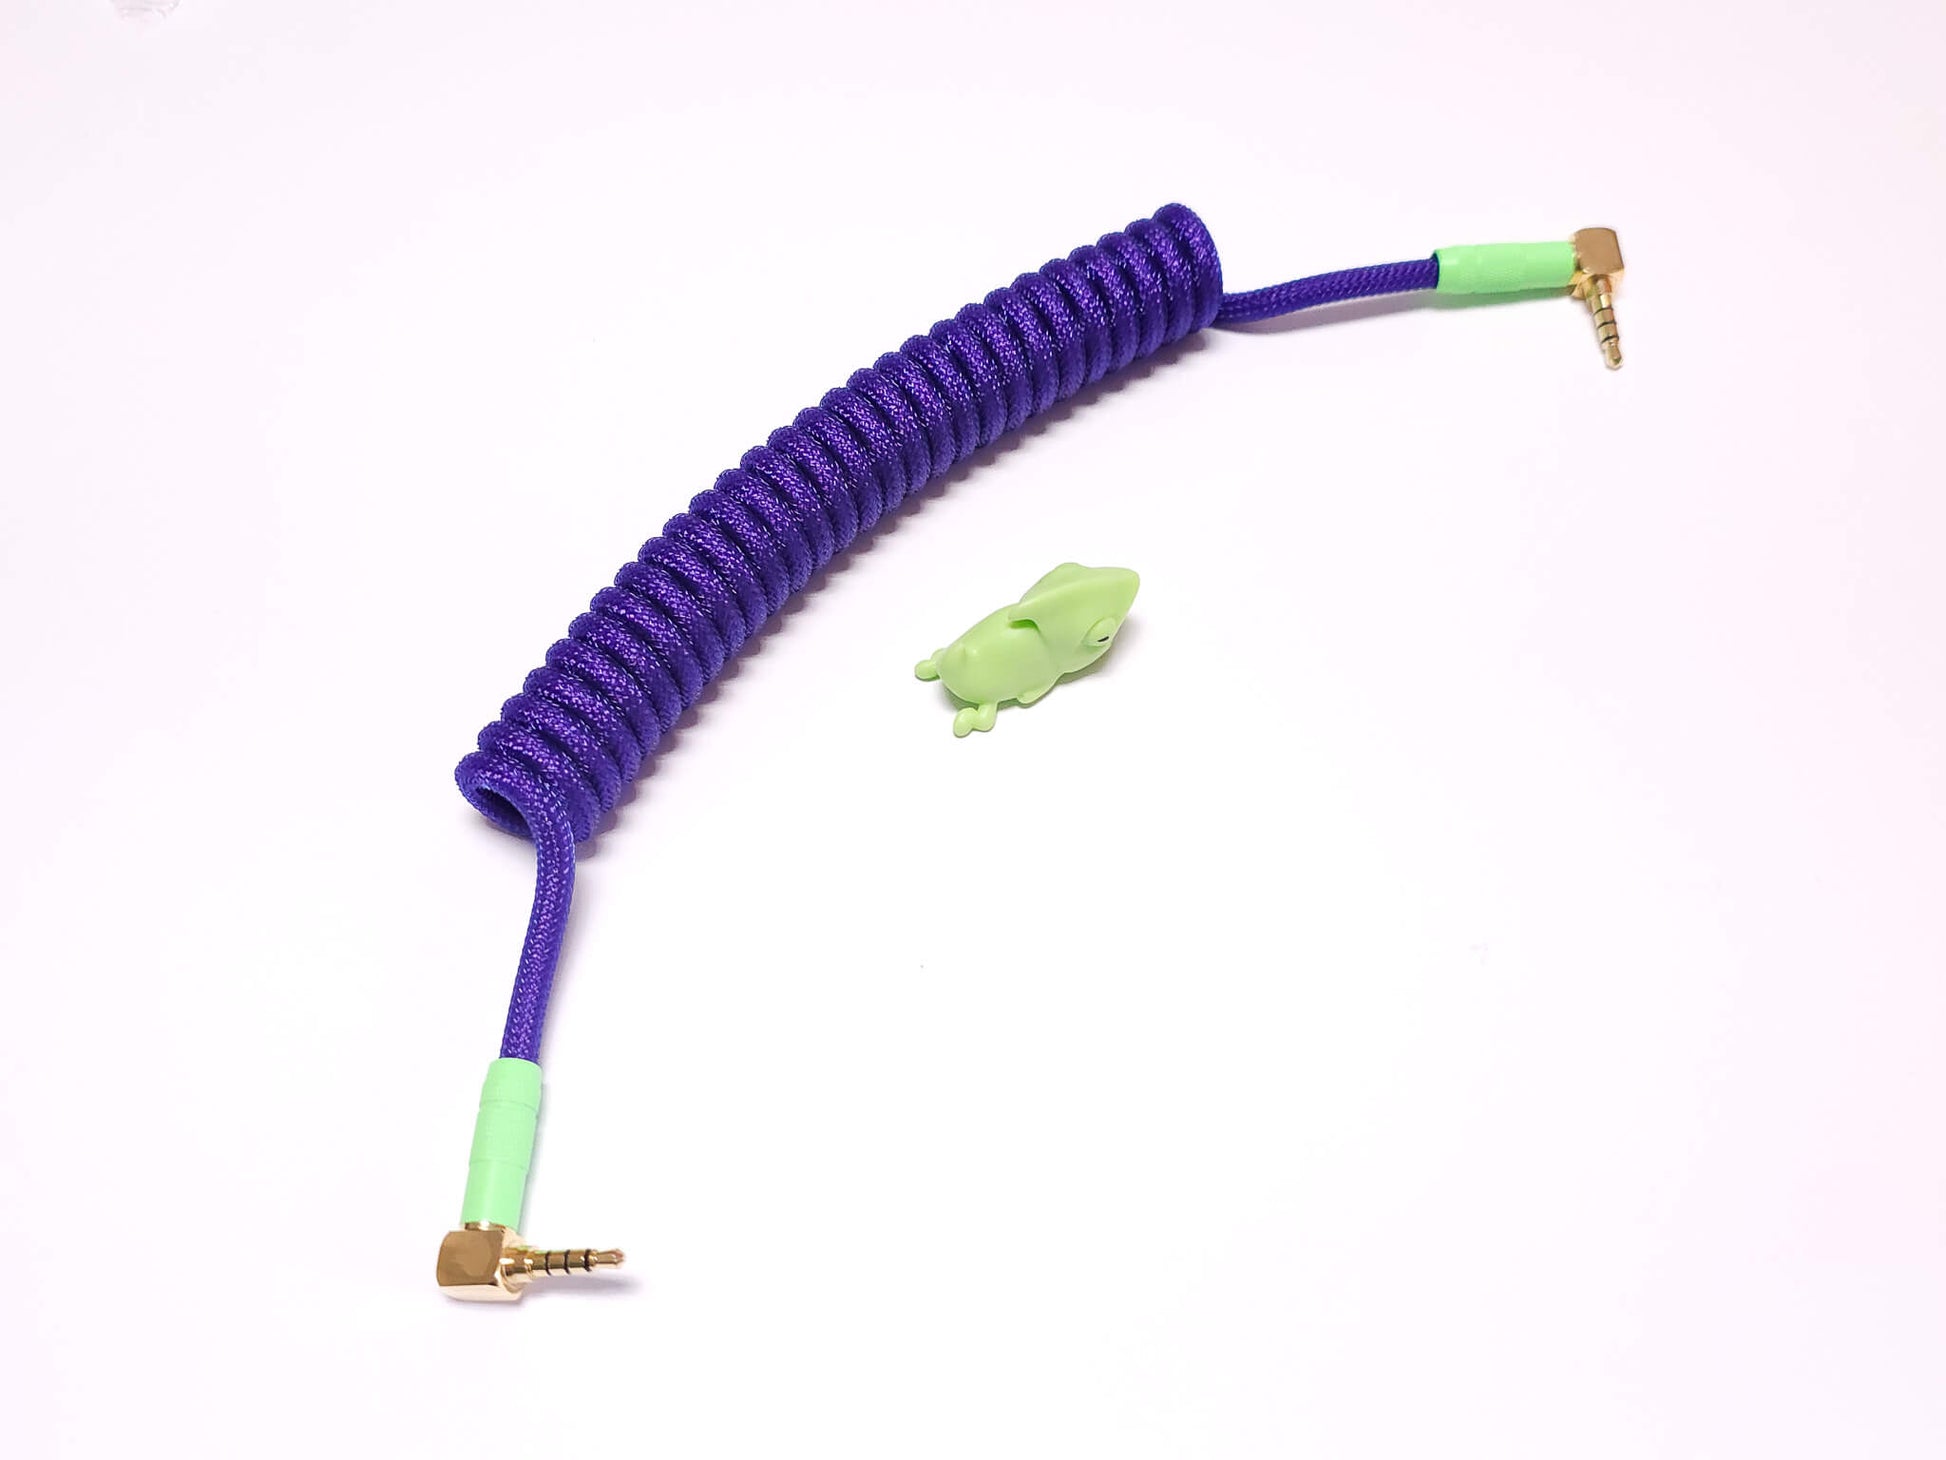 GMK Laser TRRS cable